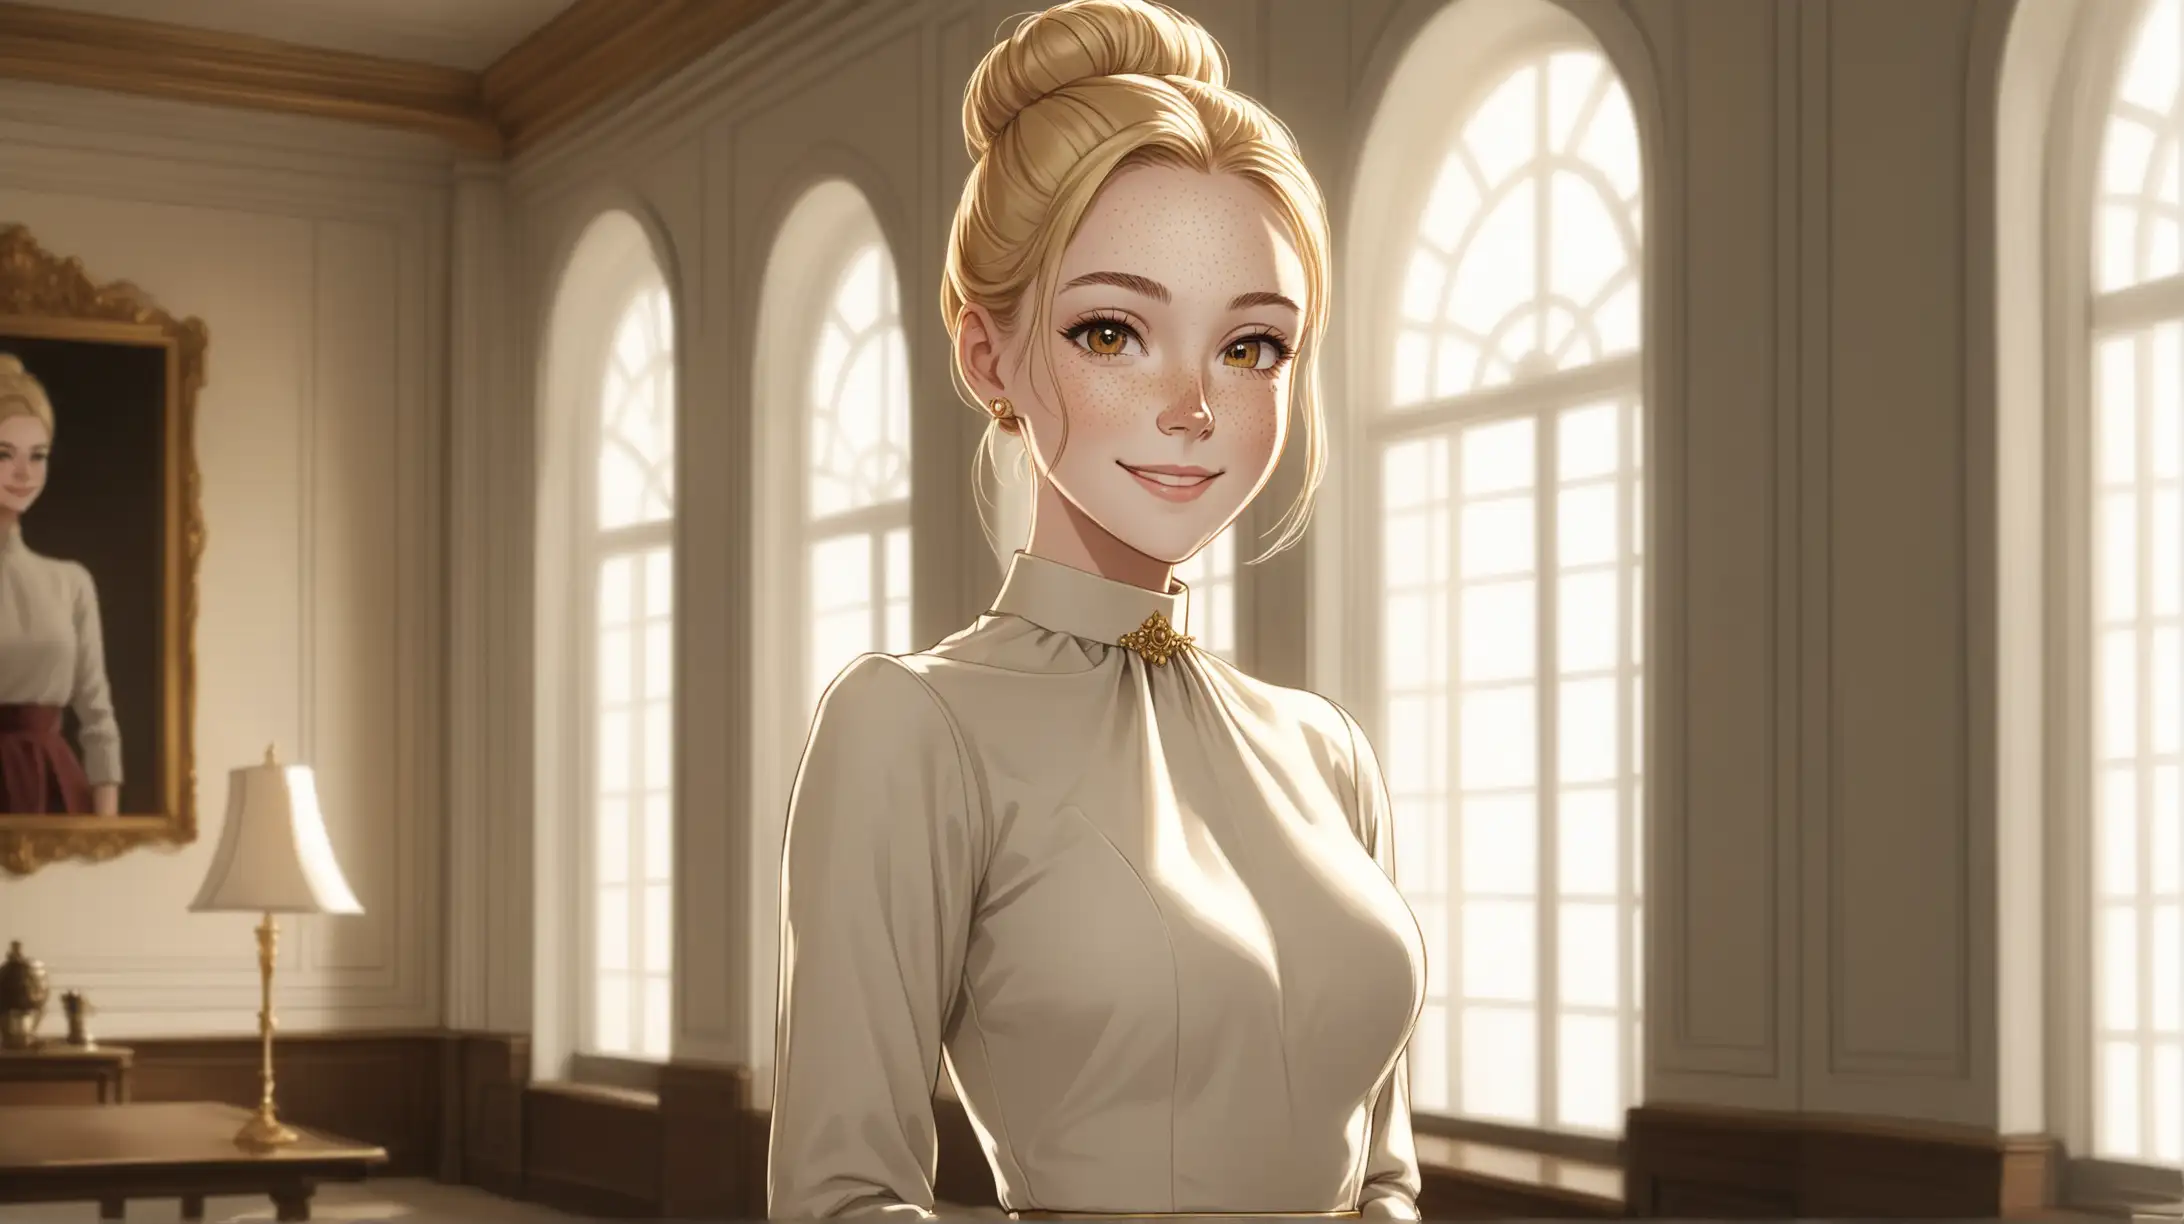 Draw a young woman, long blonde hair in a bun, gold eyes, freckles, traditional fashion body shape,
classy outfit, smiling, high quality, long shot, indoors, natural lighting